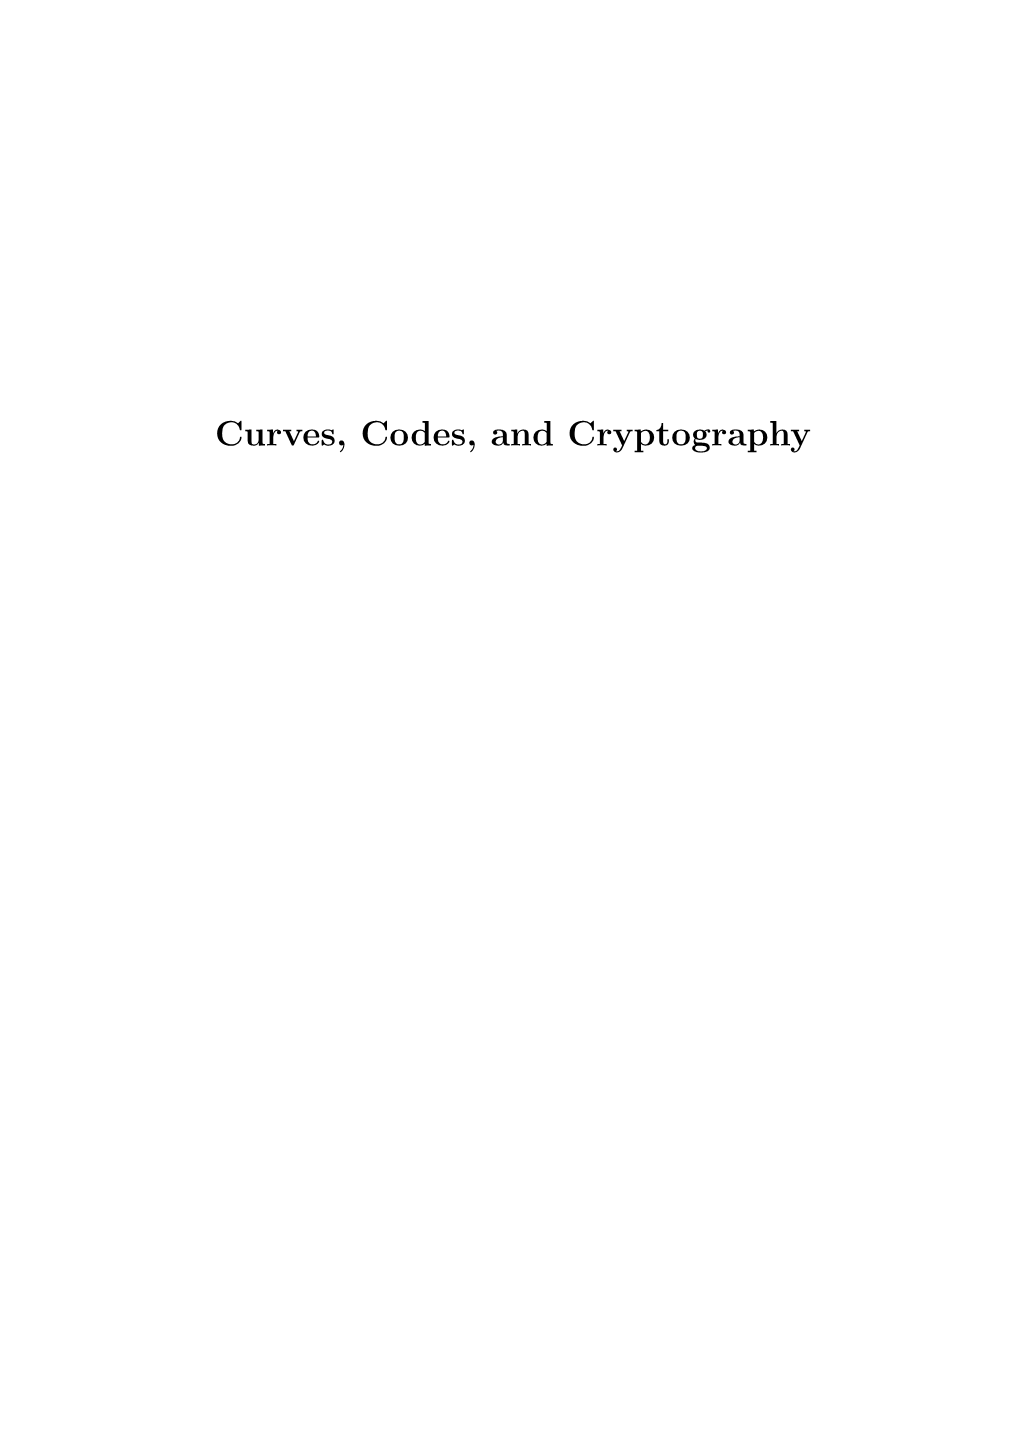 Curves, Codes, and Cryptography Copyright C 2011 by Christiane Peters